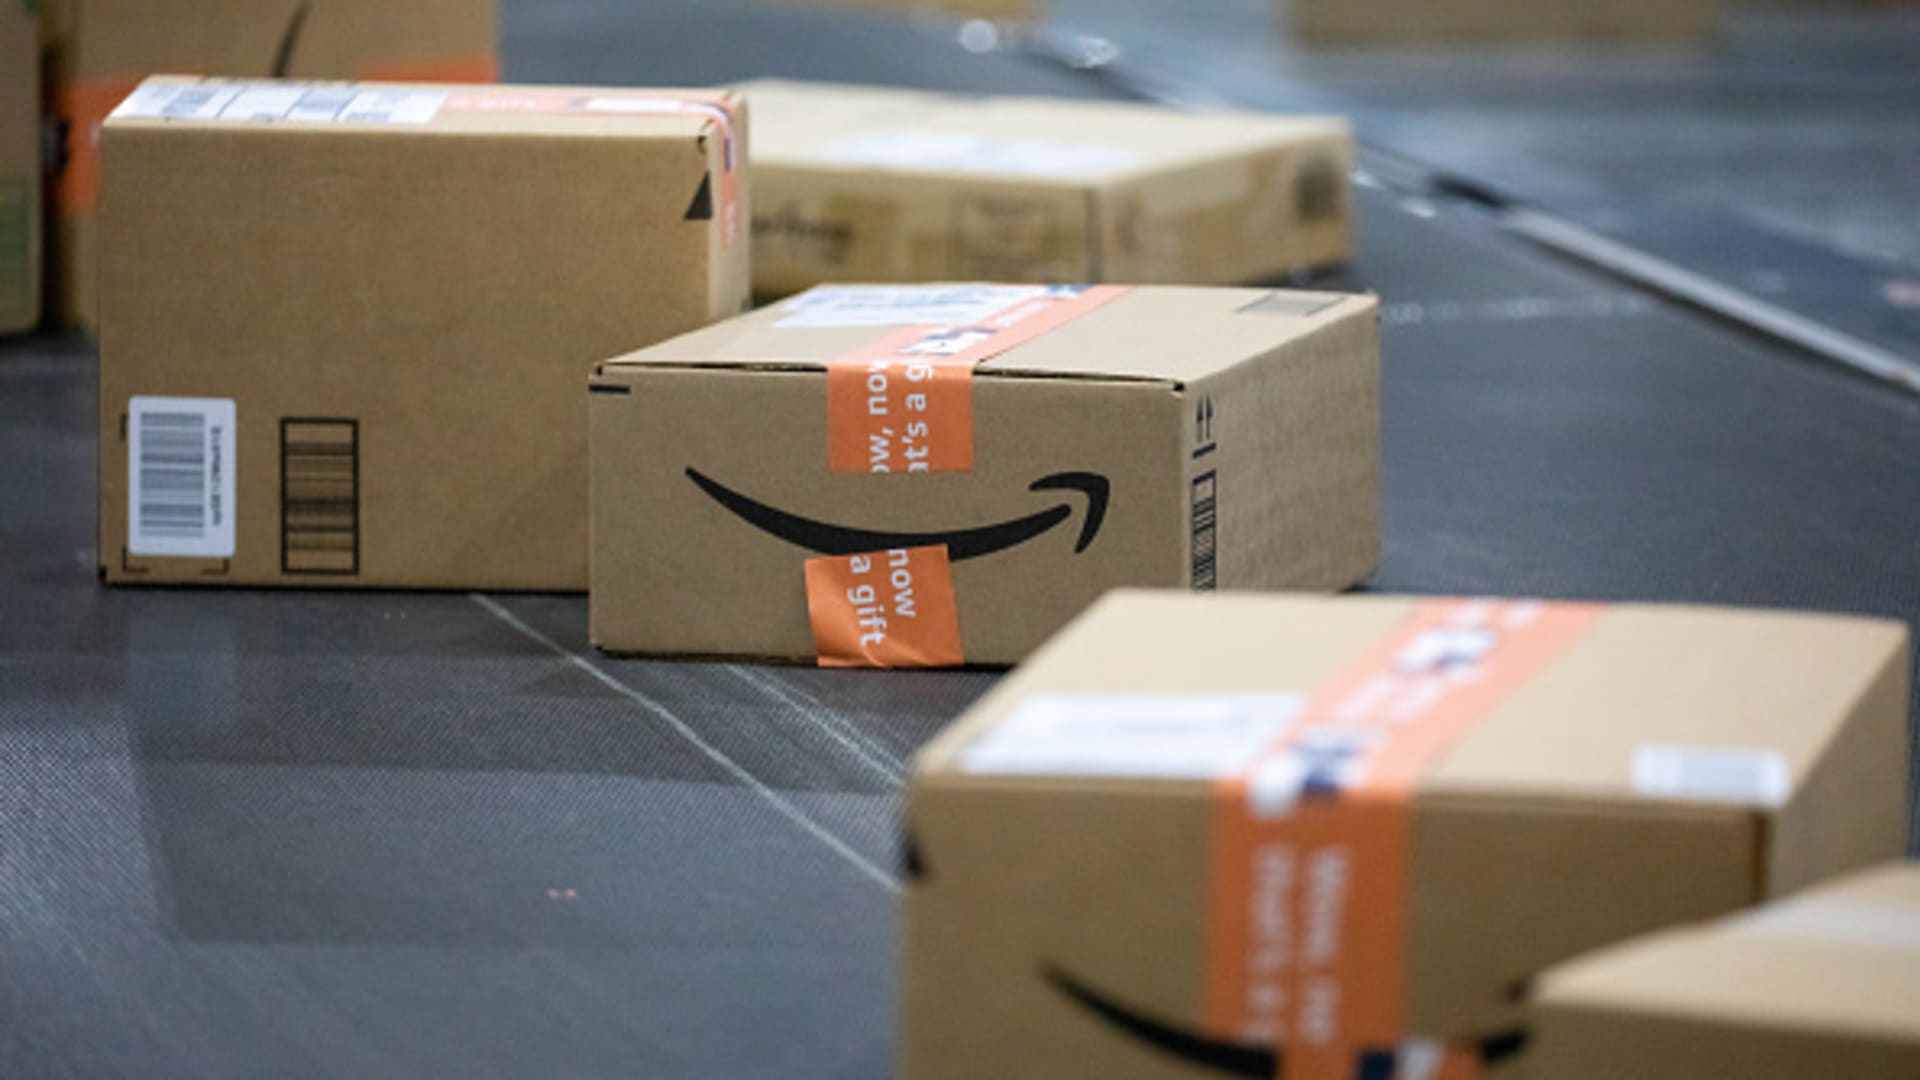 Amazon seller consultant admits to bribing employees to help clients; will plead guilty